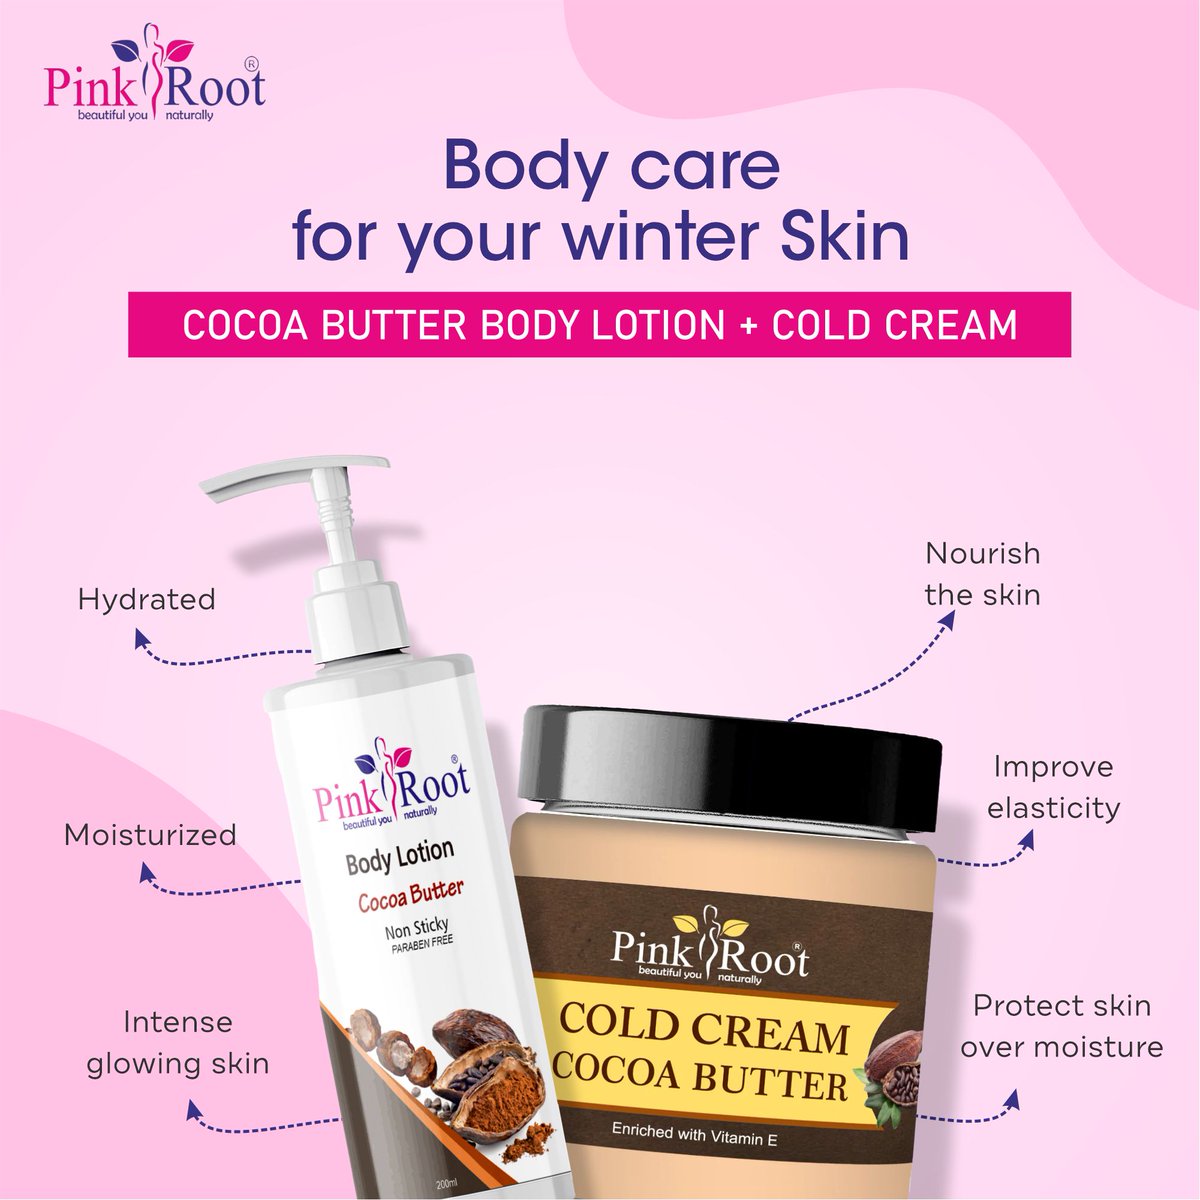 Is your body feel rough and dry? 😮
Do you have moisturized skin ?😢
Don't worry we have a very good solution you 😍

pinkroot.in

#BodyCare #BodyScrub #Bodywash #BabyBathandBodyRange #BabyBodyLotion #BodyLotion #BabyBodyCare #VitaminCBodyLotion #BodyLotion #Skincare